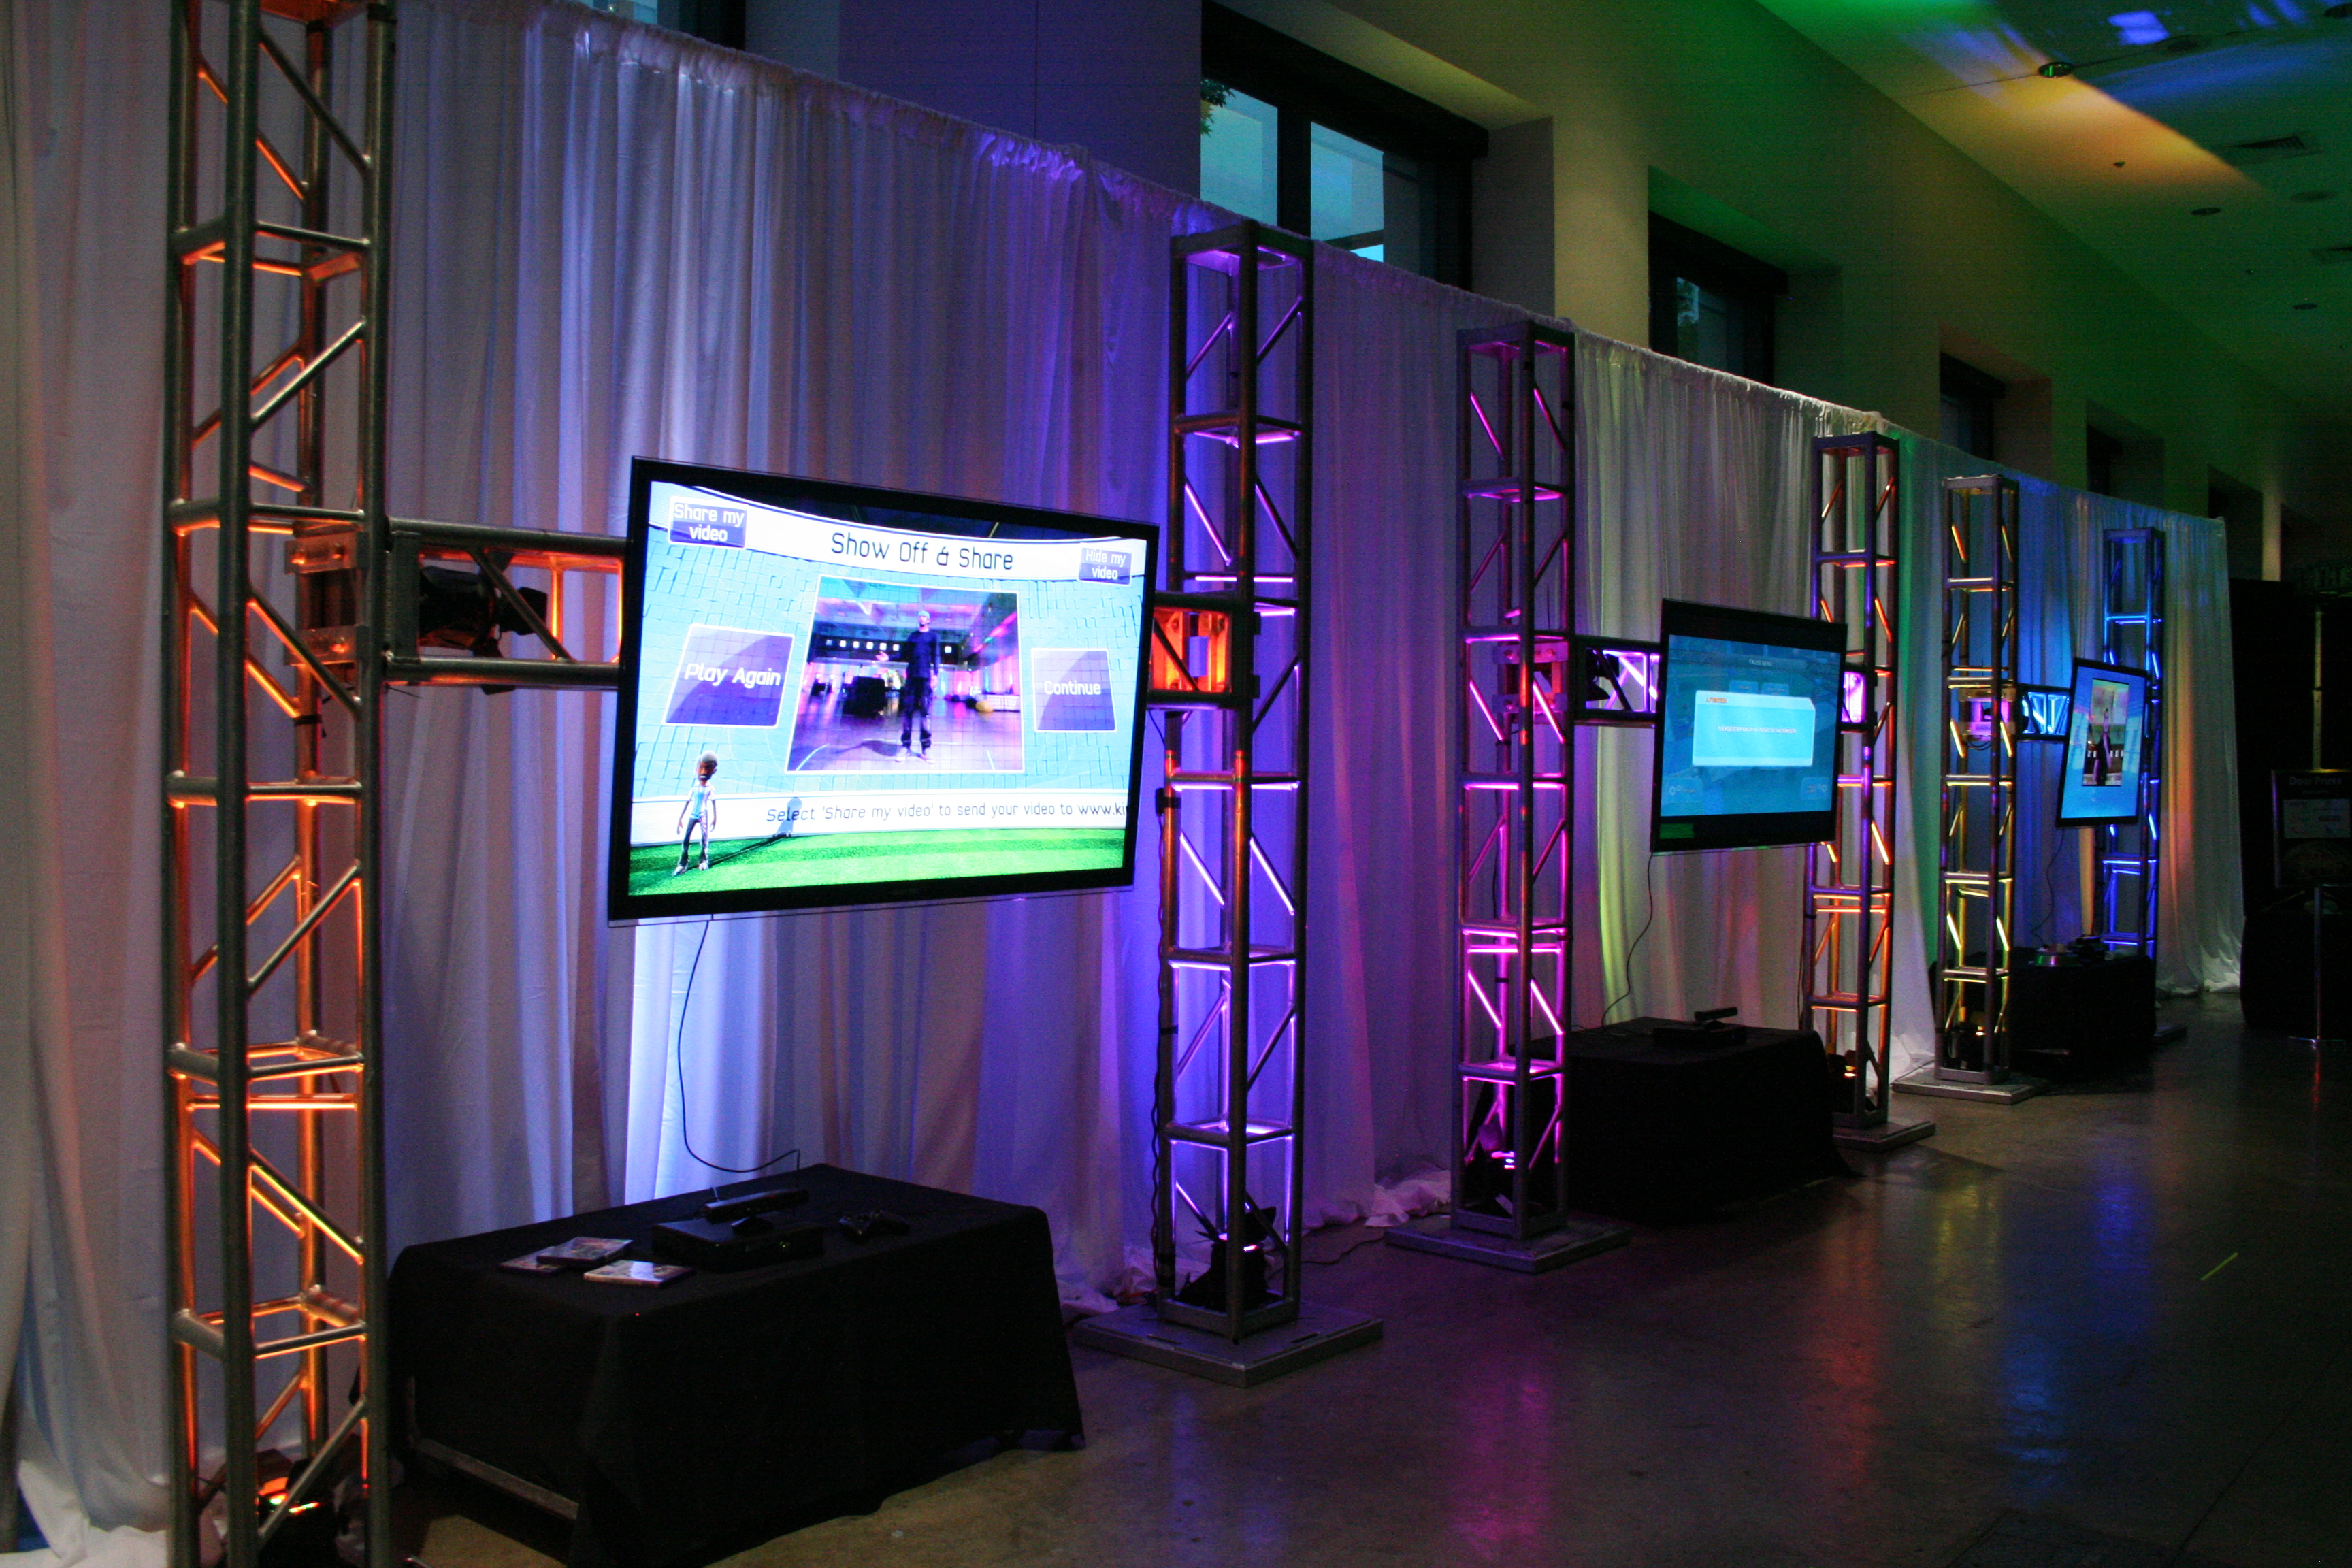 Wii, XBox, Watch TV, Marquis for Your Event